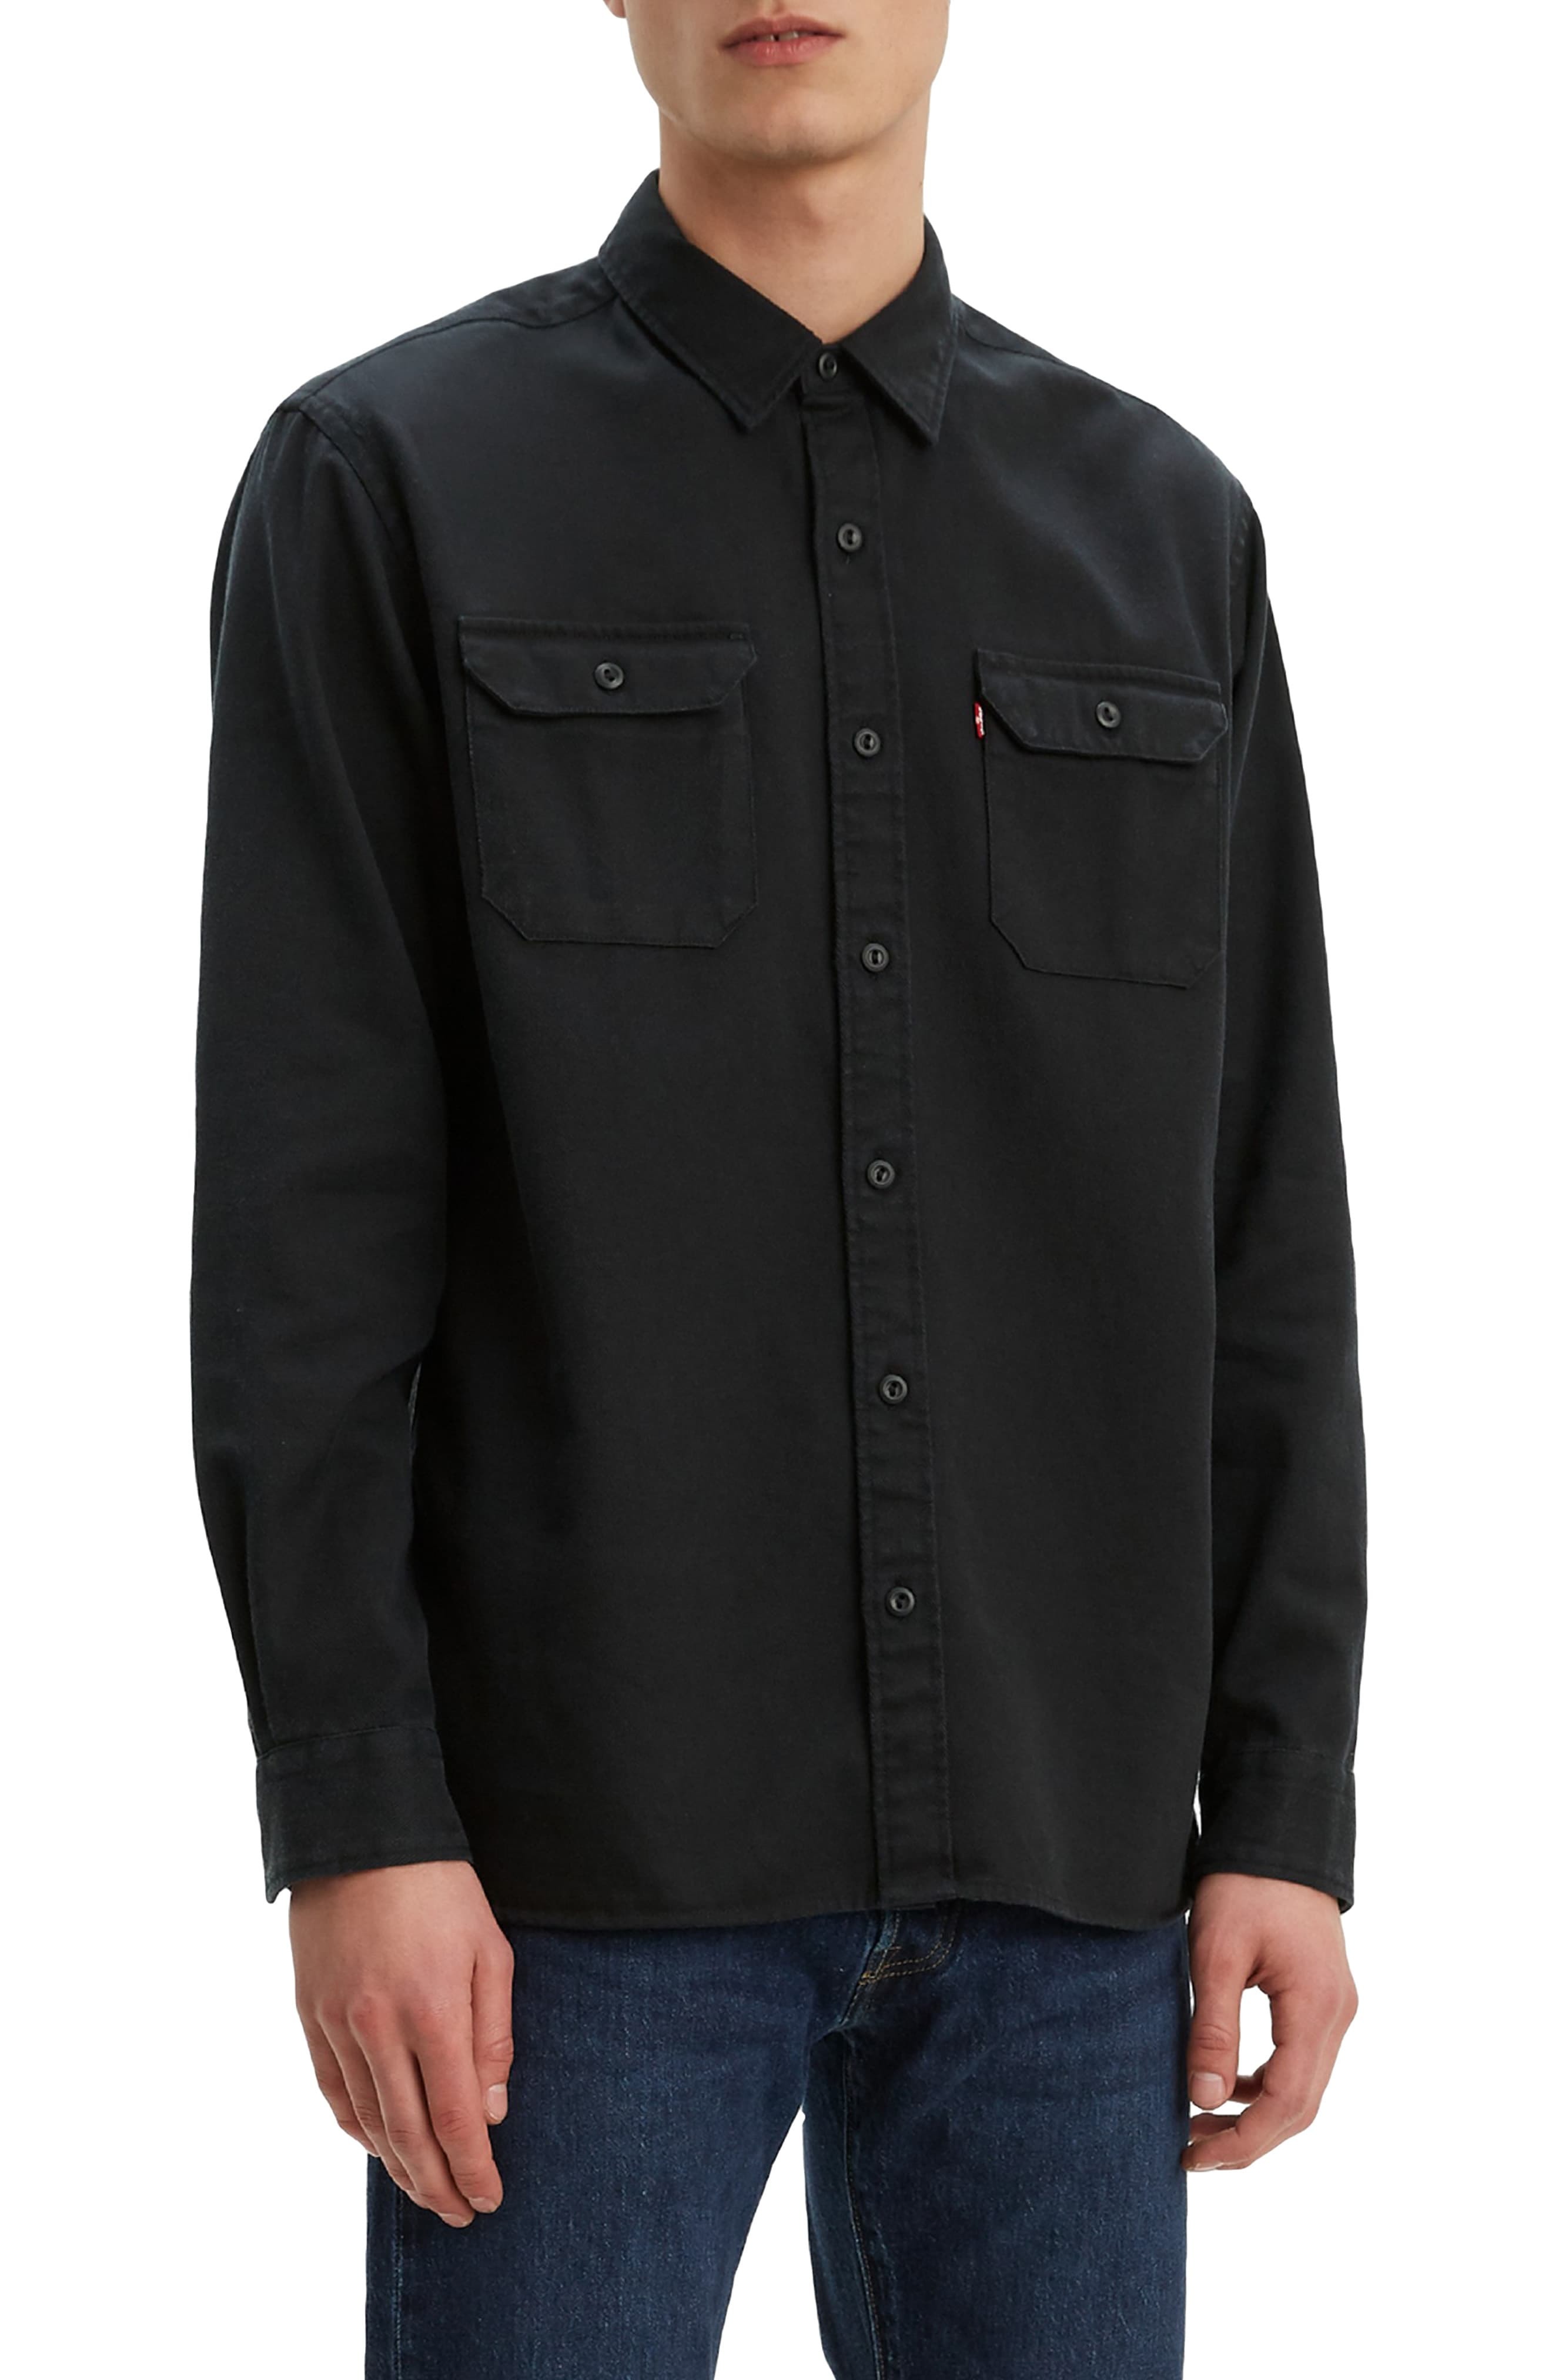 Station noon vaccination Levi's Jackson Slim Fit Black Button Up Work Shirt, $34 | Nordstrom |  Lookastic